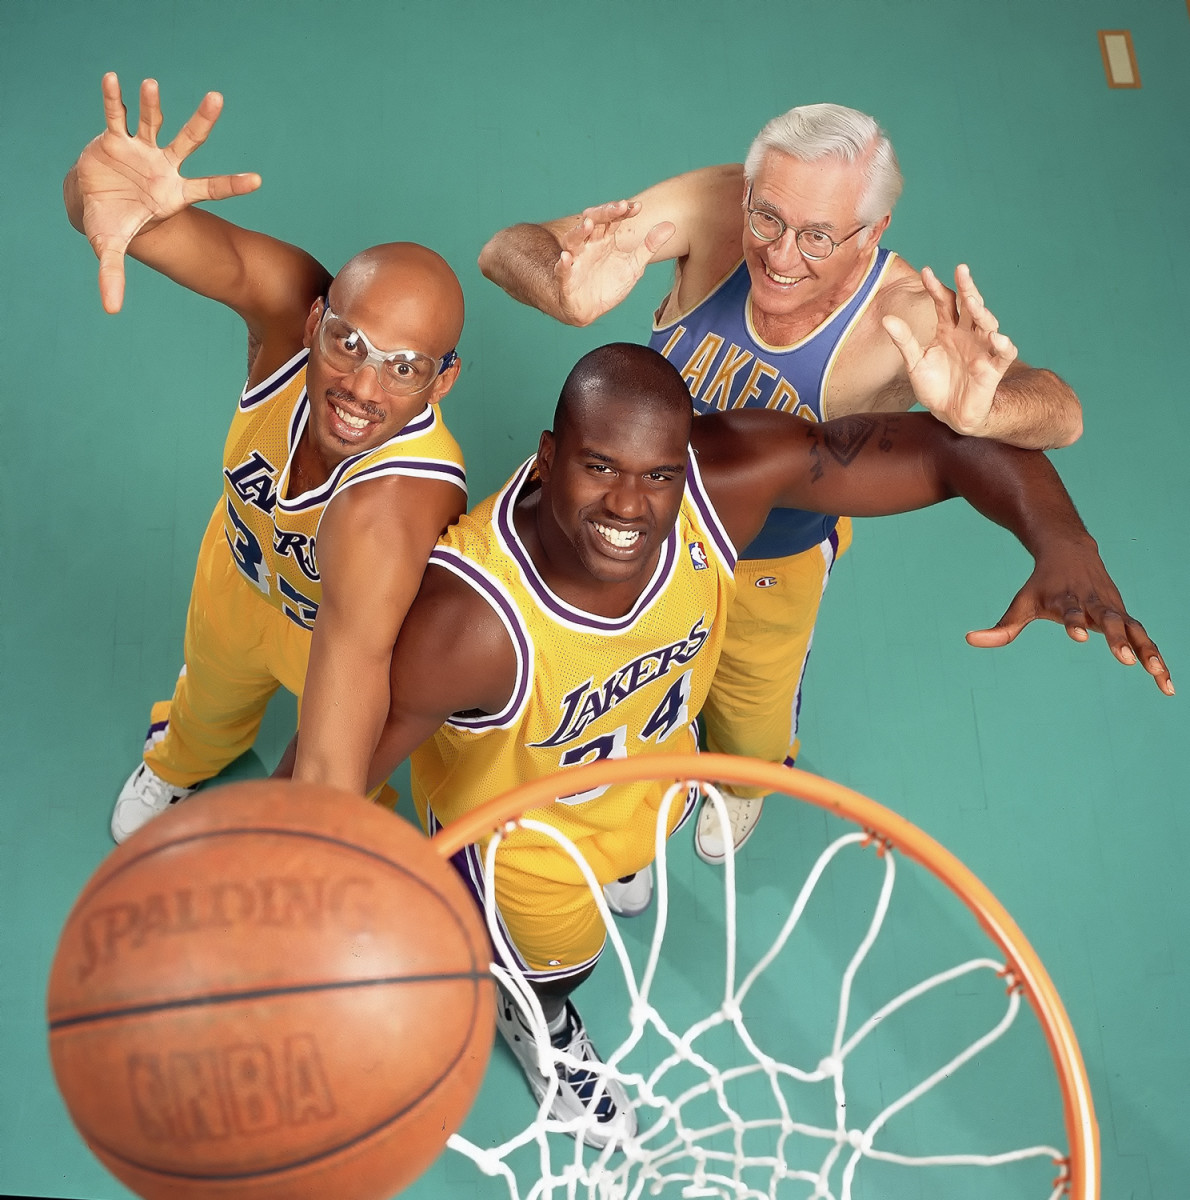 Kobe and Shaq wallpaper by Jared64646  Download on ZEDGE  5066